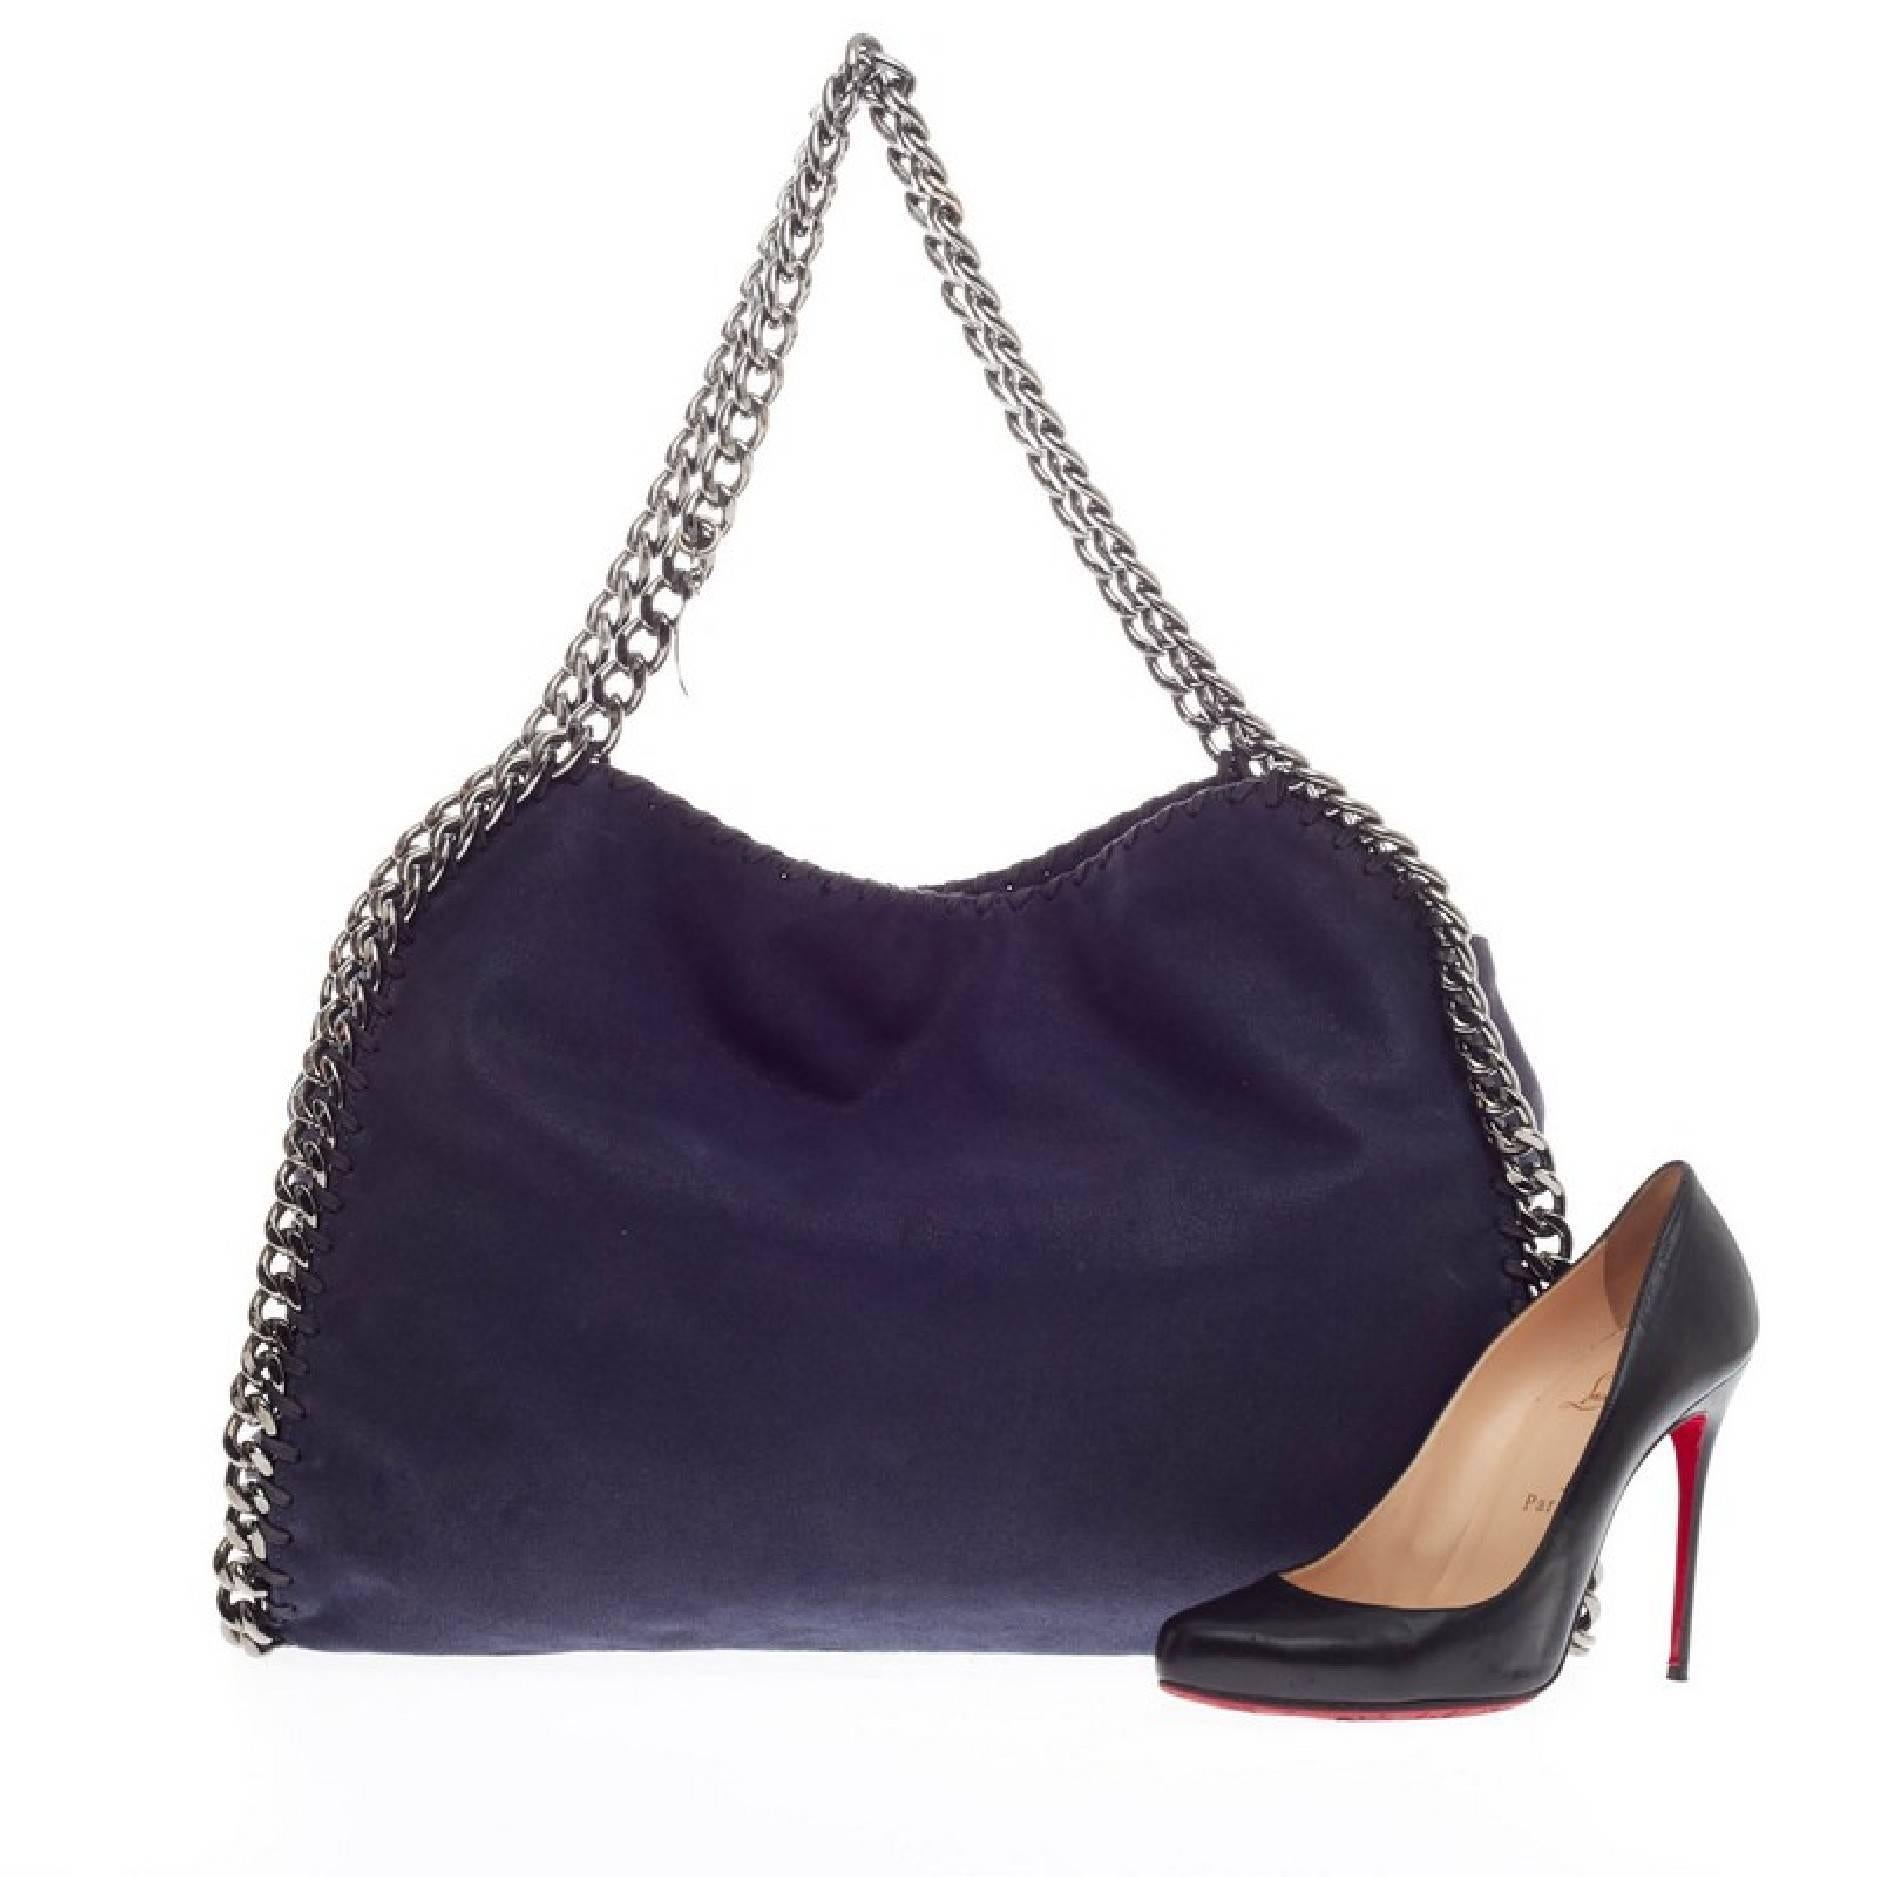 This authentic Stella McCartney Falabella Tote Shaggy Deer Small is perfectly textured in navy blue shaggy deer polyester. This no-fuss, easy tote features gunmetal chain link handles and trim, whipstitched edges, and a hanging logo disc. Its